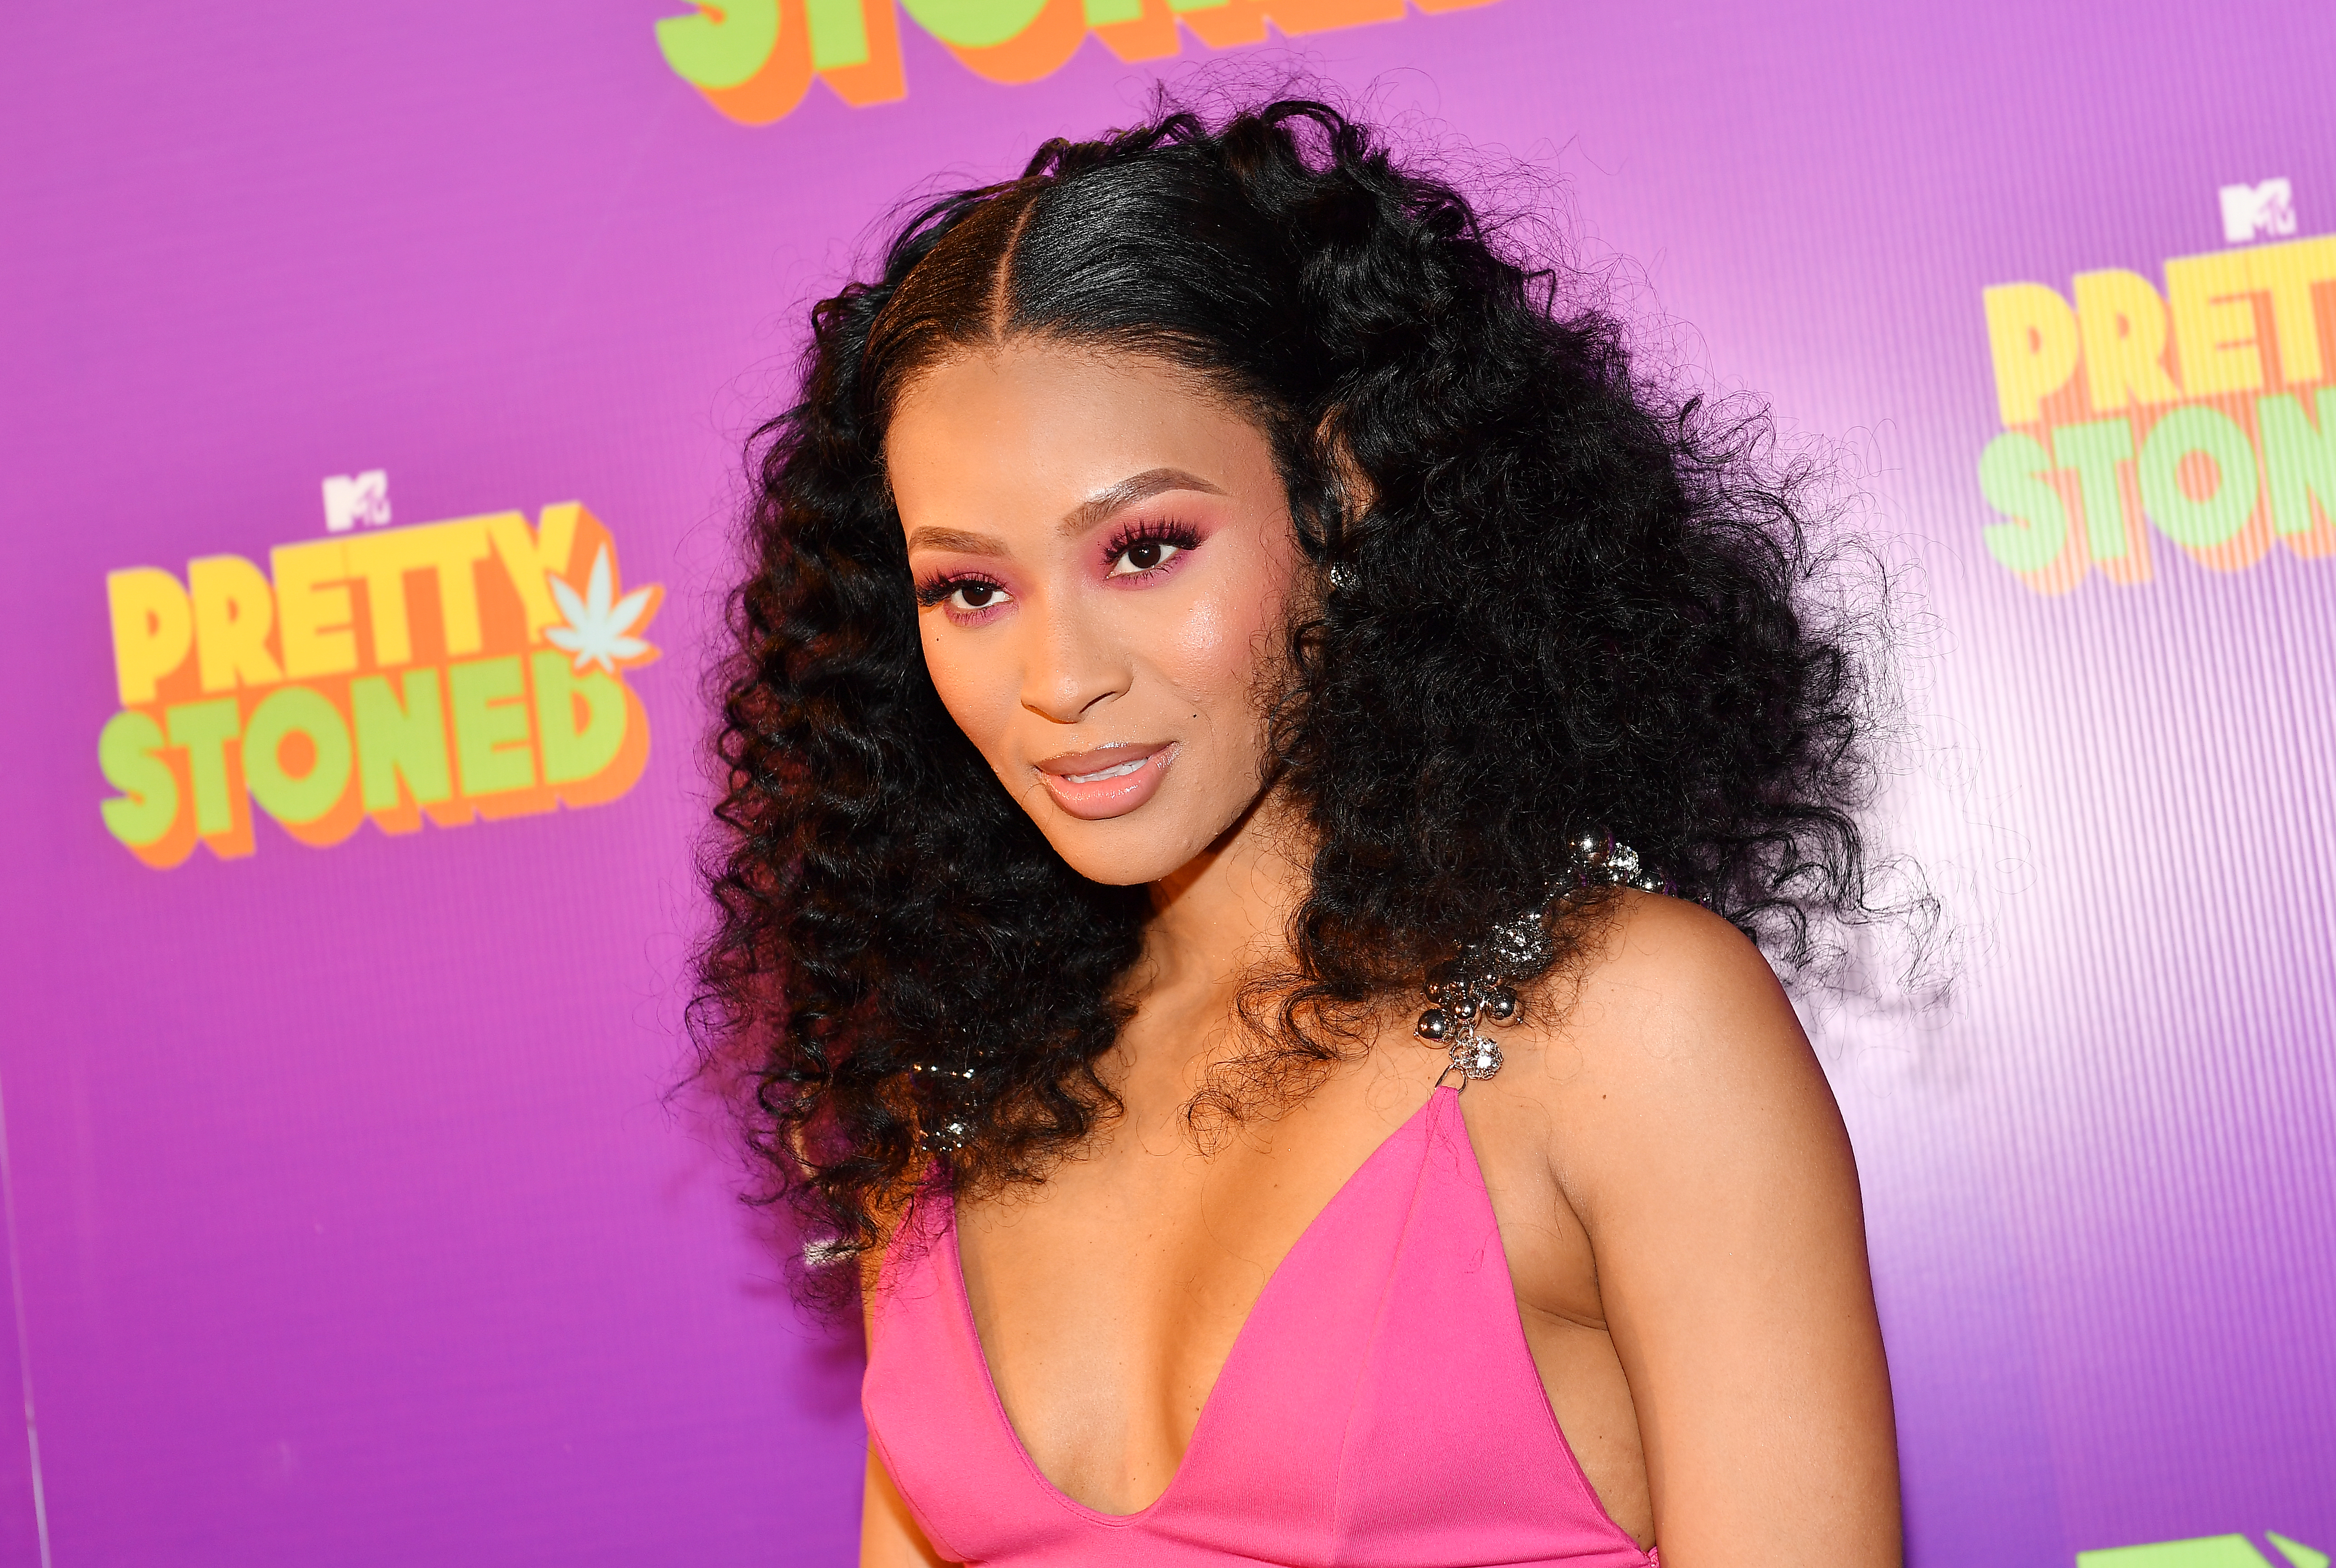 Pretty Vee attend "Pretty Stoned" private Atlanta viewing at IPIC Theater, on April 19, 2023, in Atlanta, Georgia. | Source: Getty Images